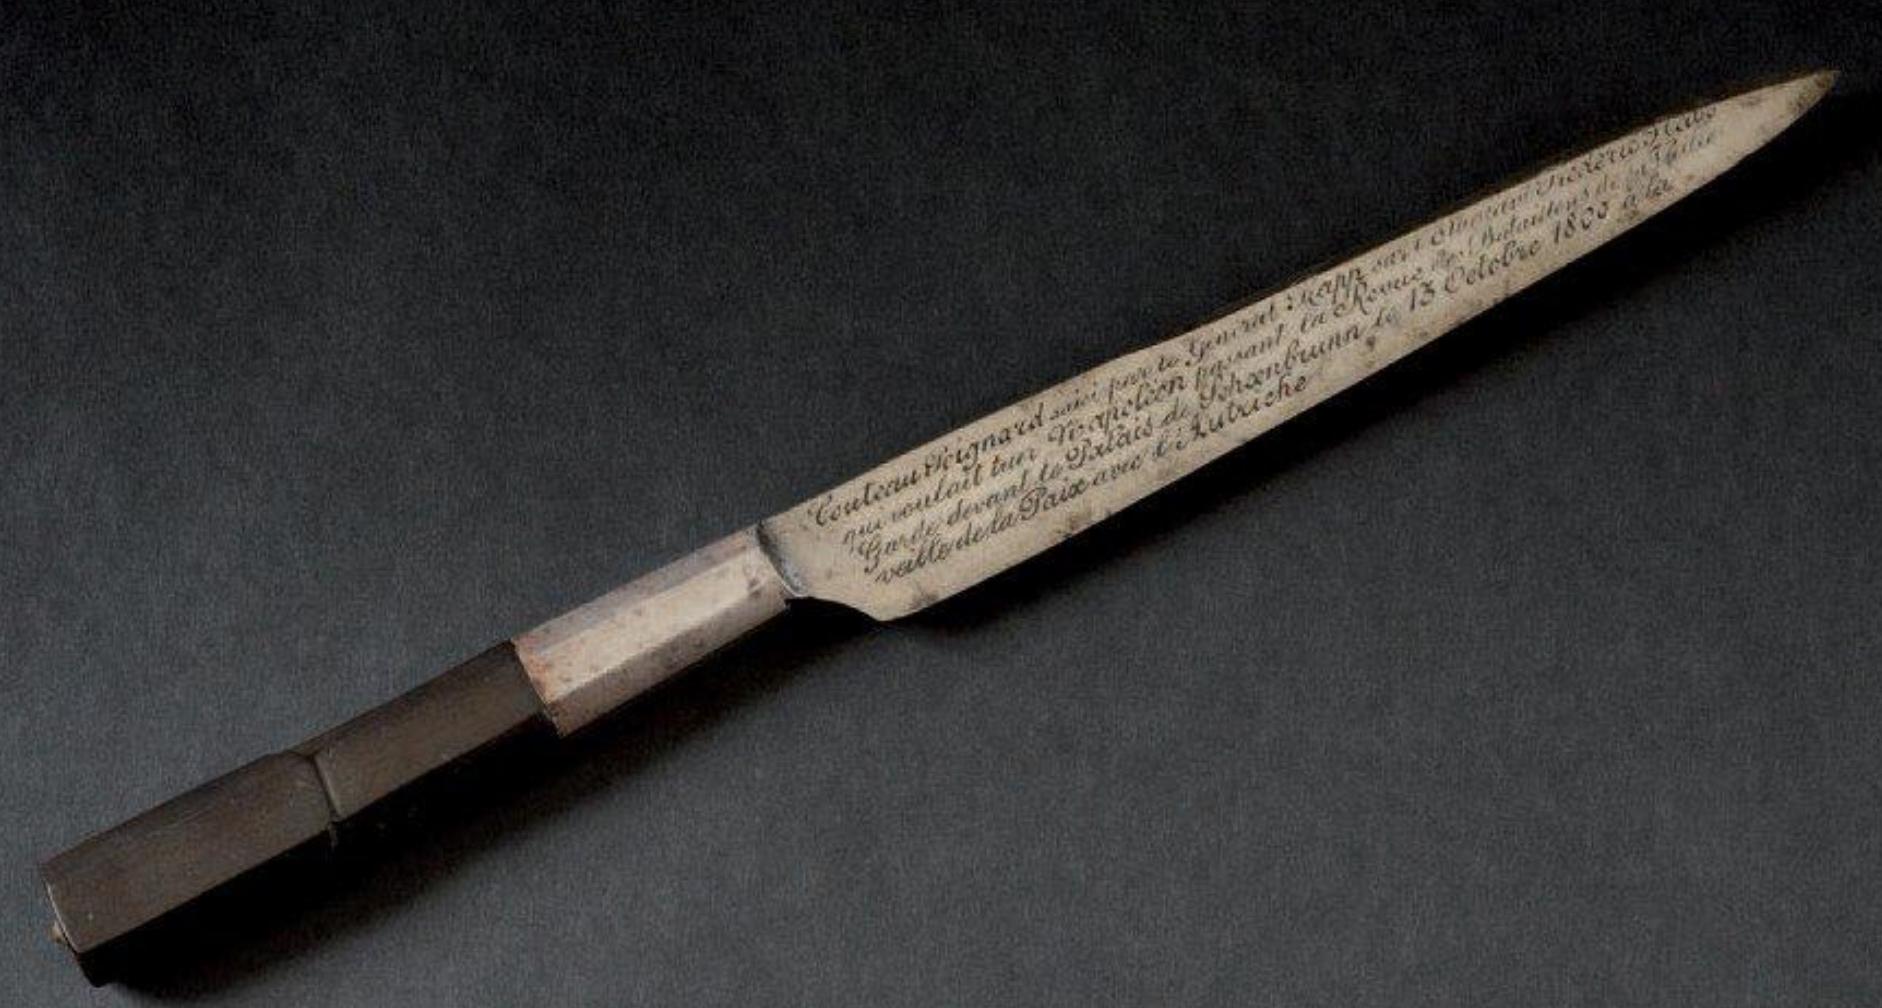 The knife taken from a German student who wanted to assassinate Napoleon.